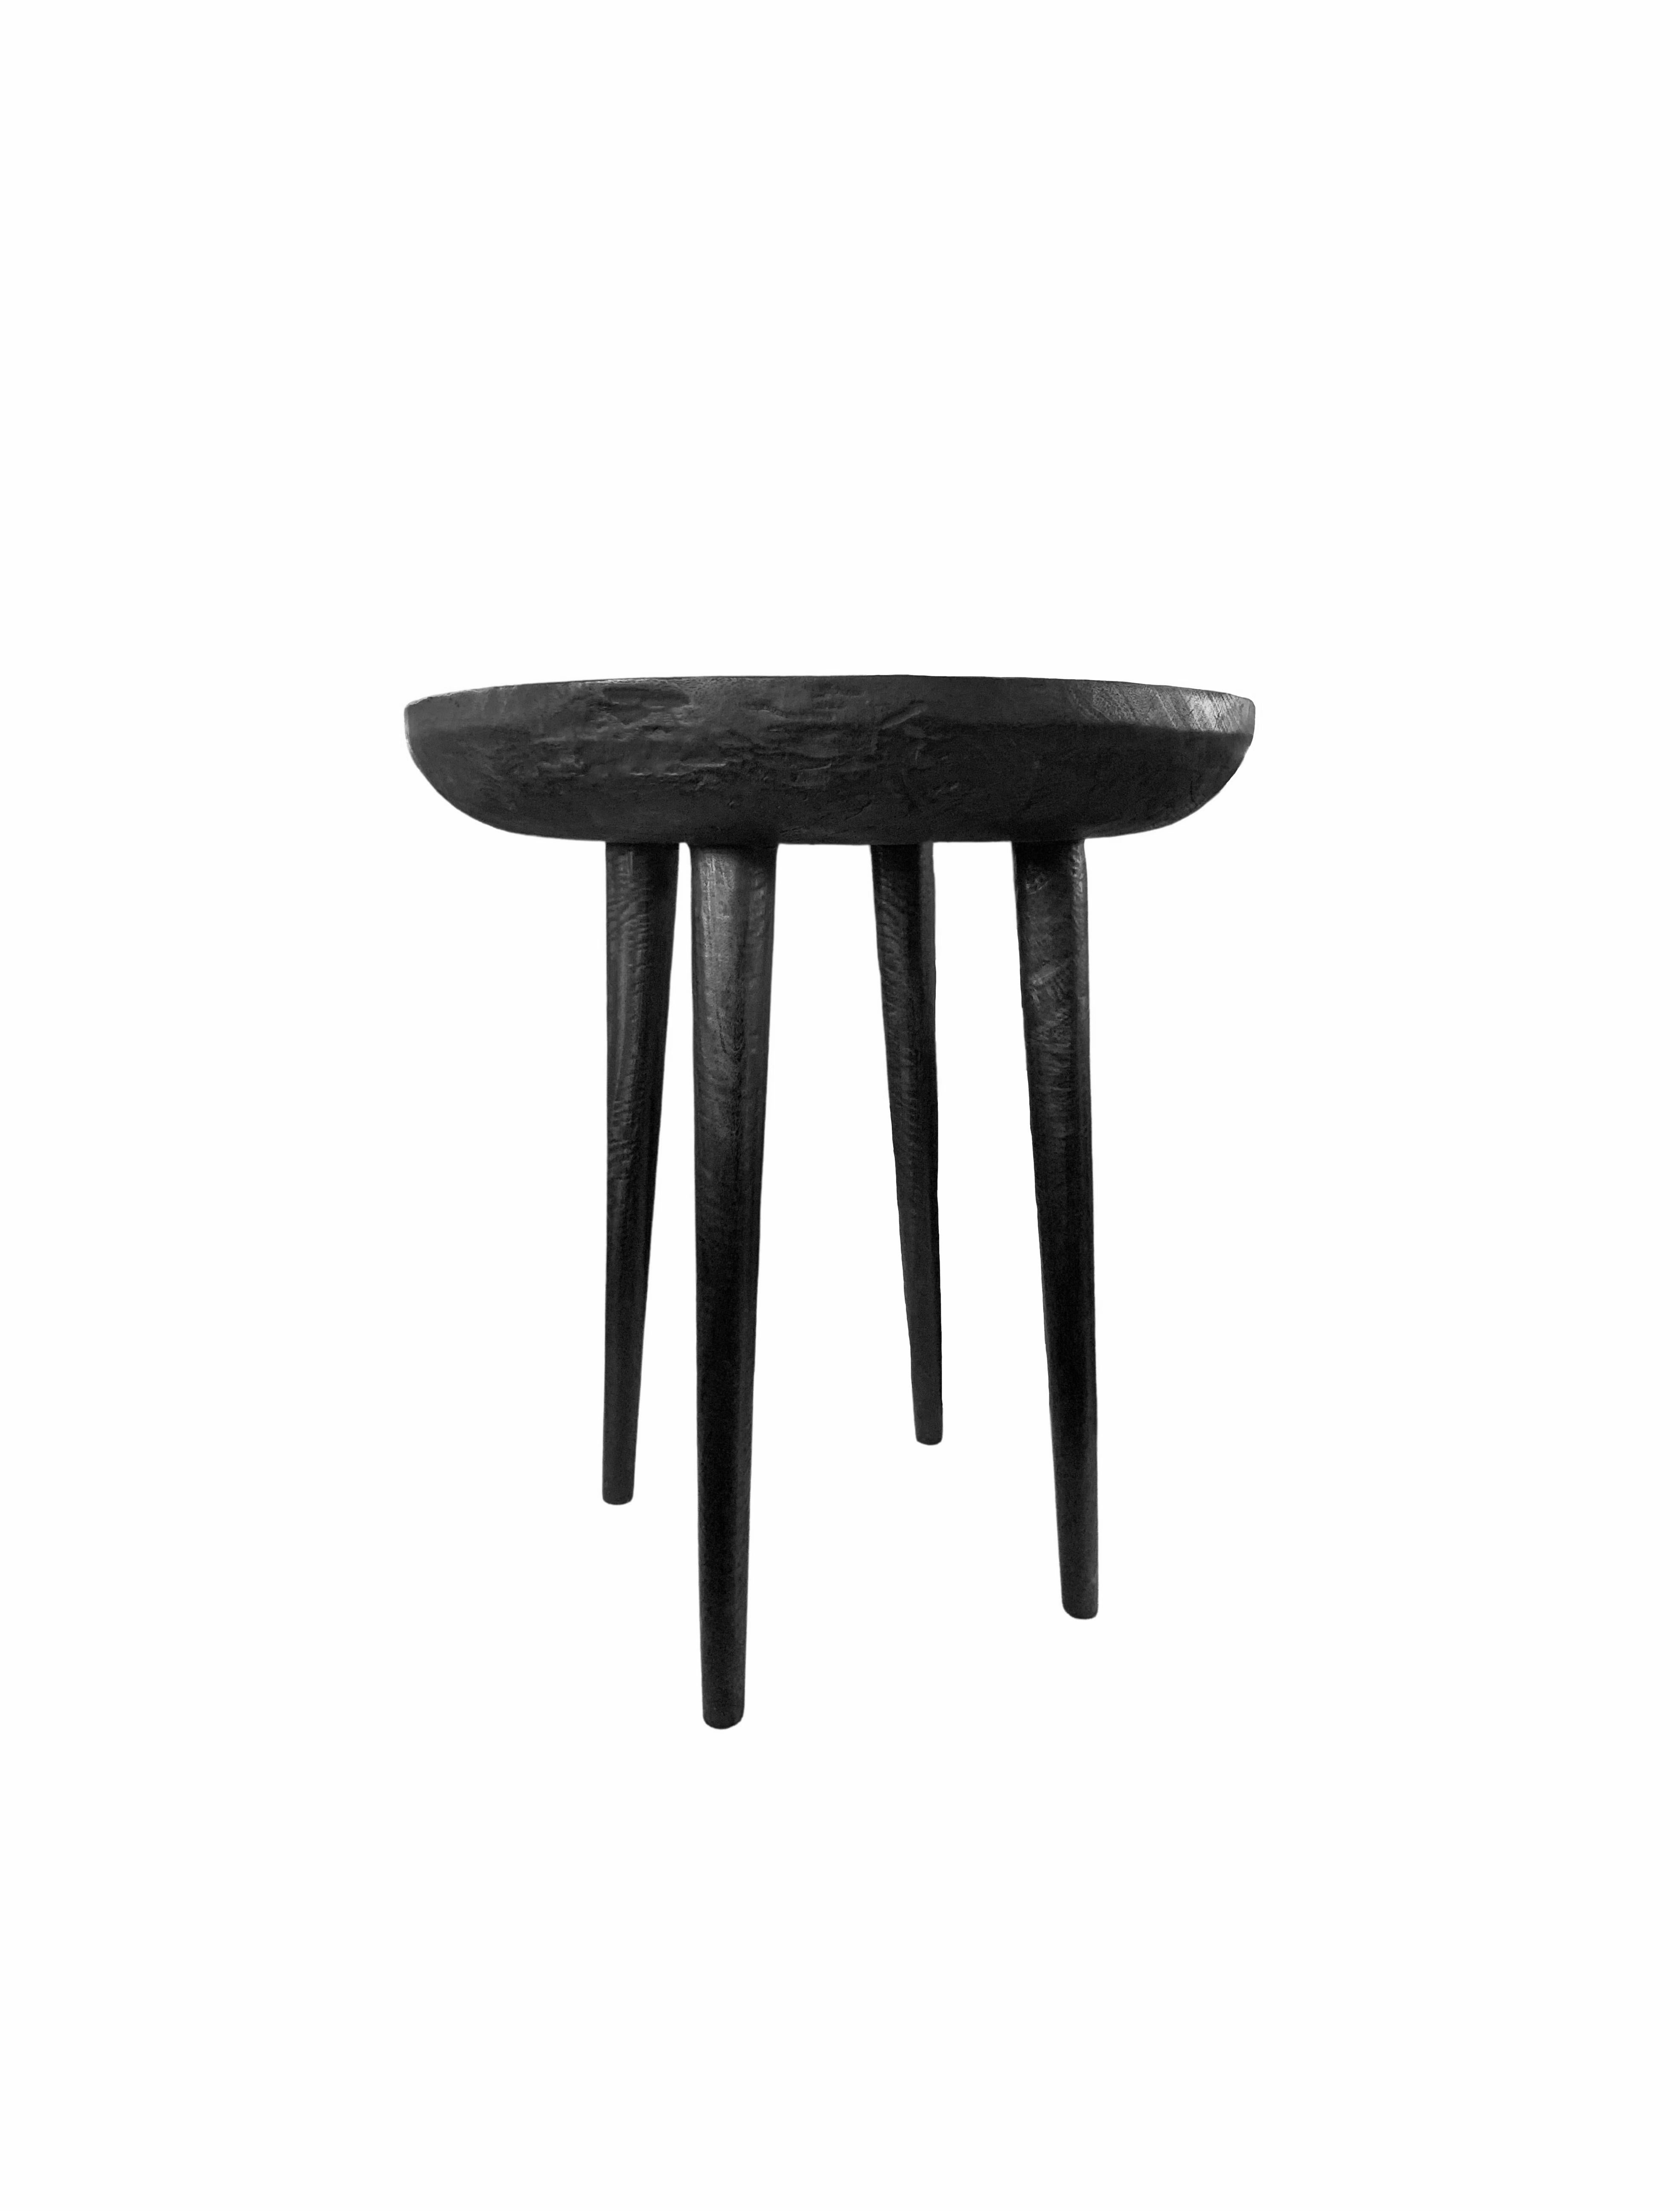 Organic Modern Sculptural Side Table Crafted from Mango Wood & Burnt, Black Finish For Sale